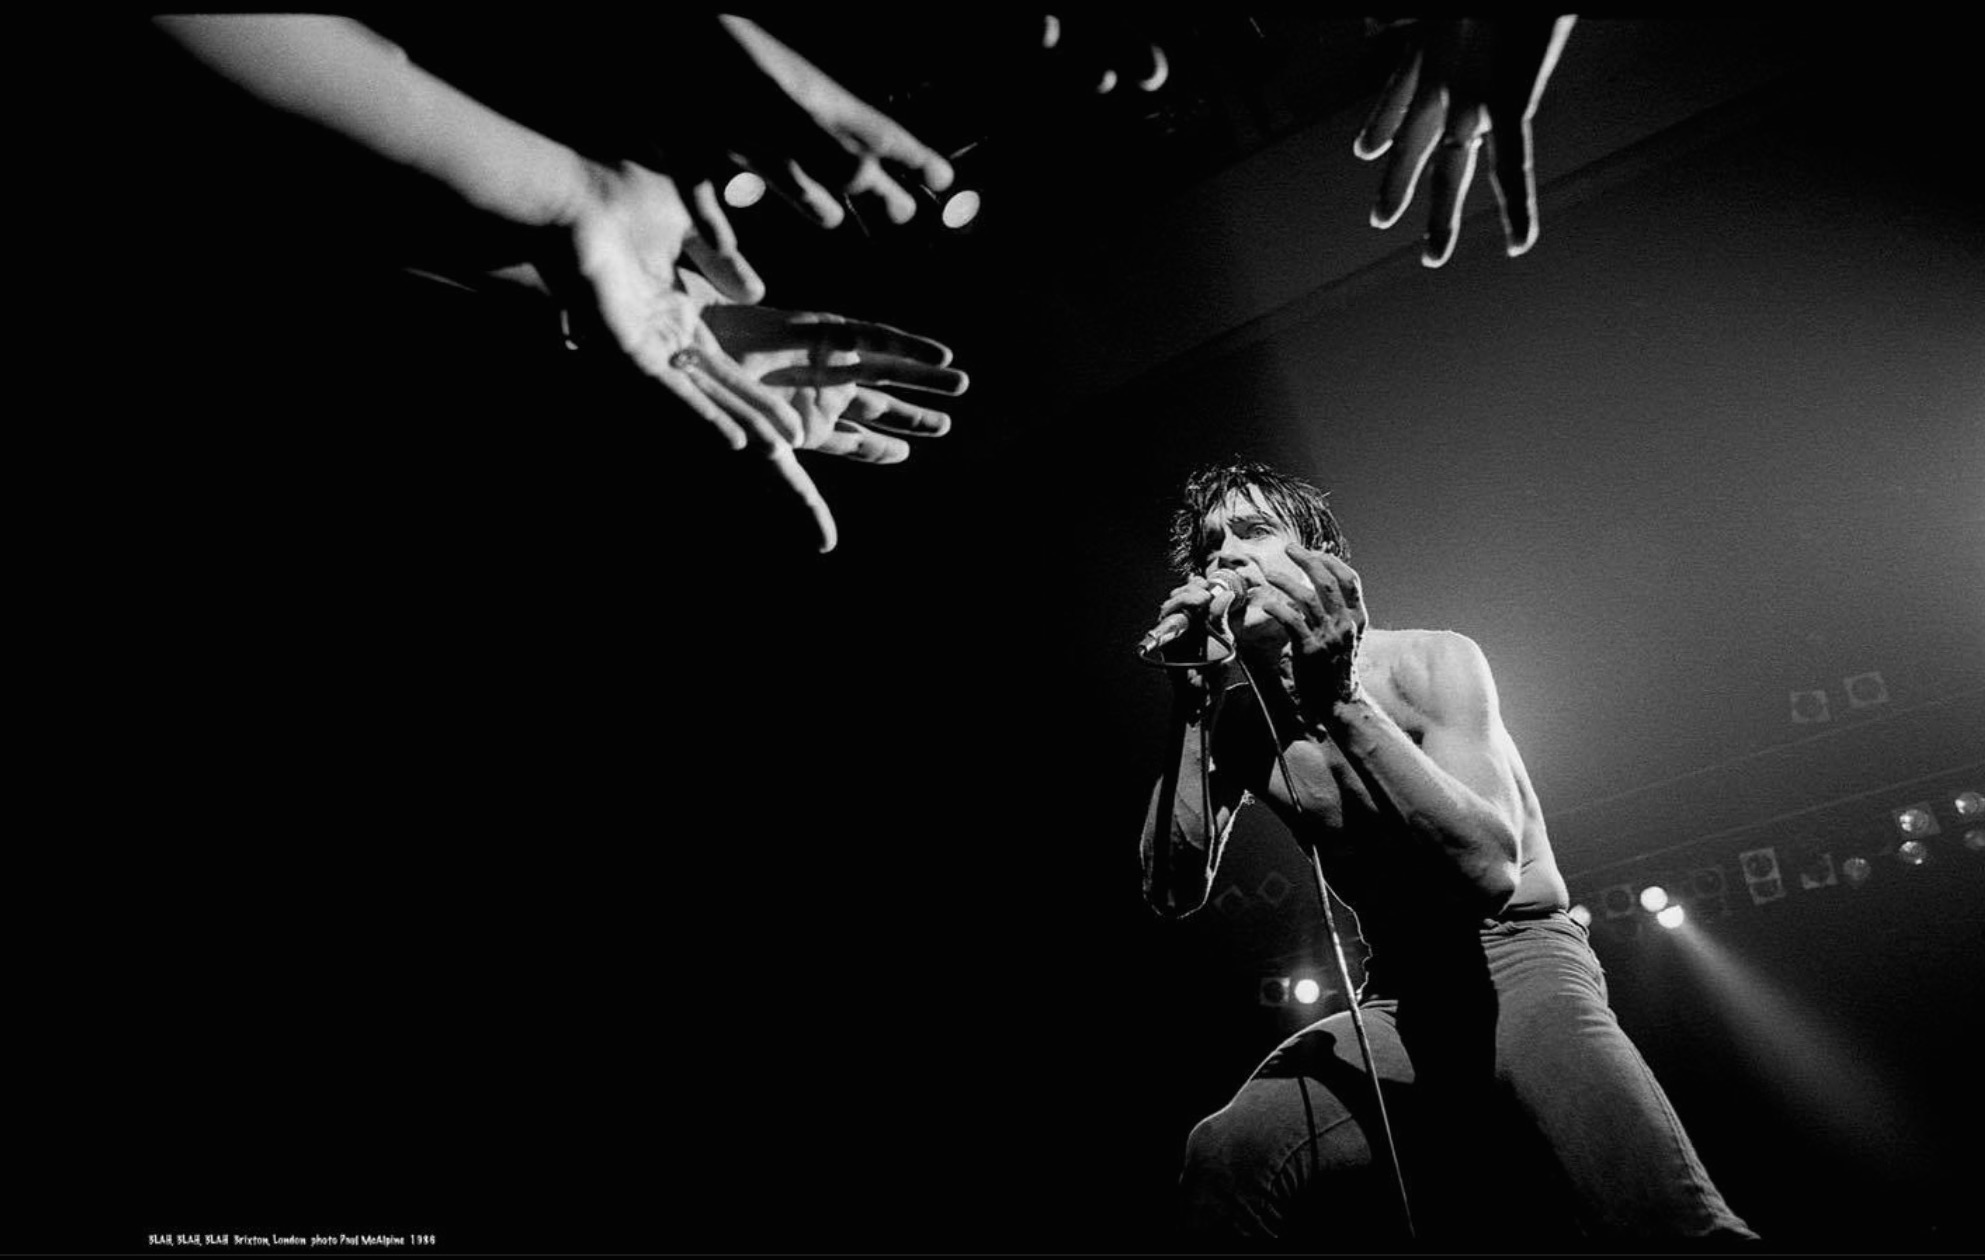 Iggy Pop in the hands of the fans - Photo © Paul McAlpine